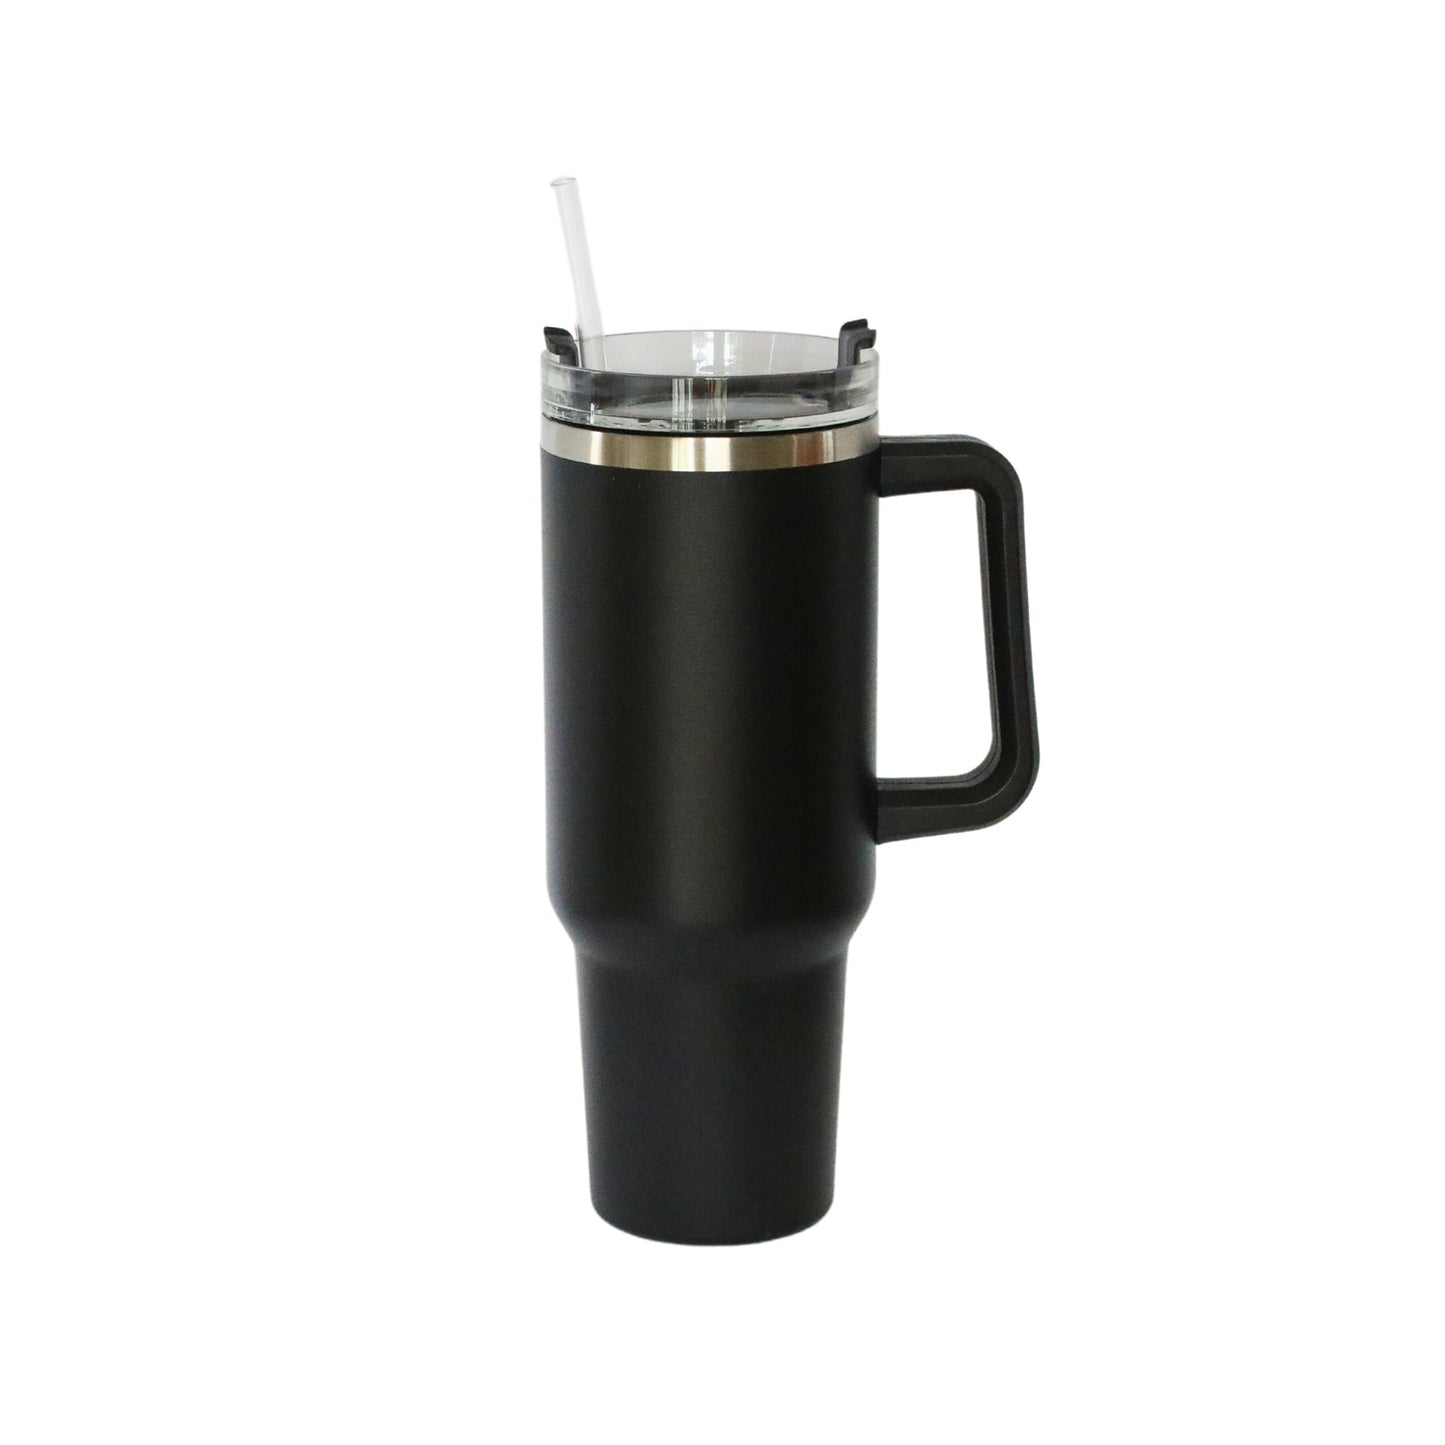 40 Oz Stainless Steel Tumbler with Handle & Straw - Black